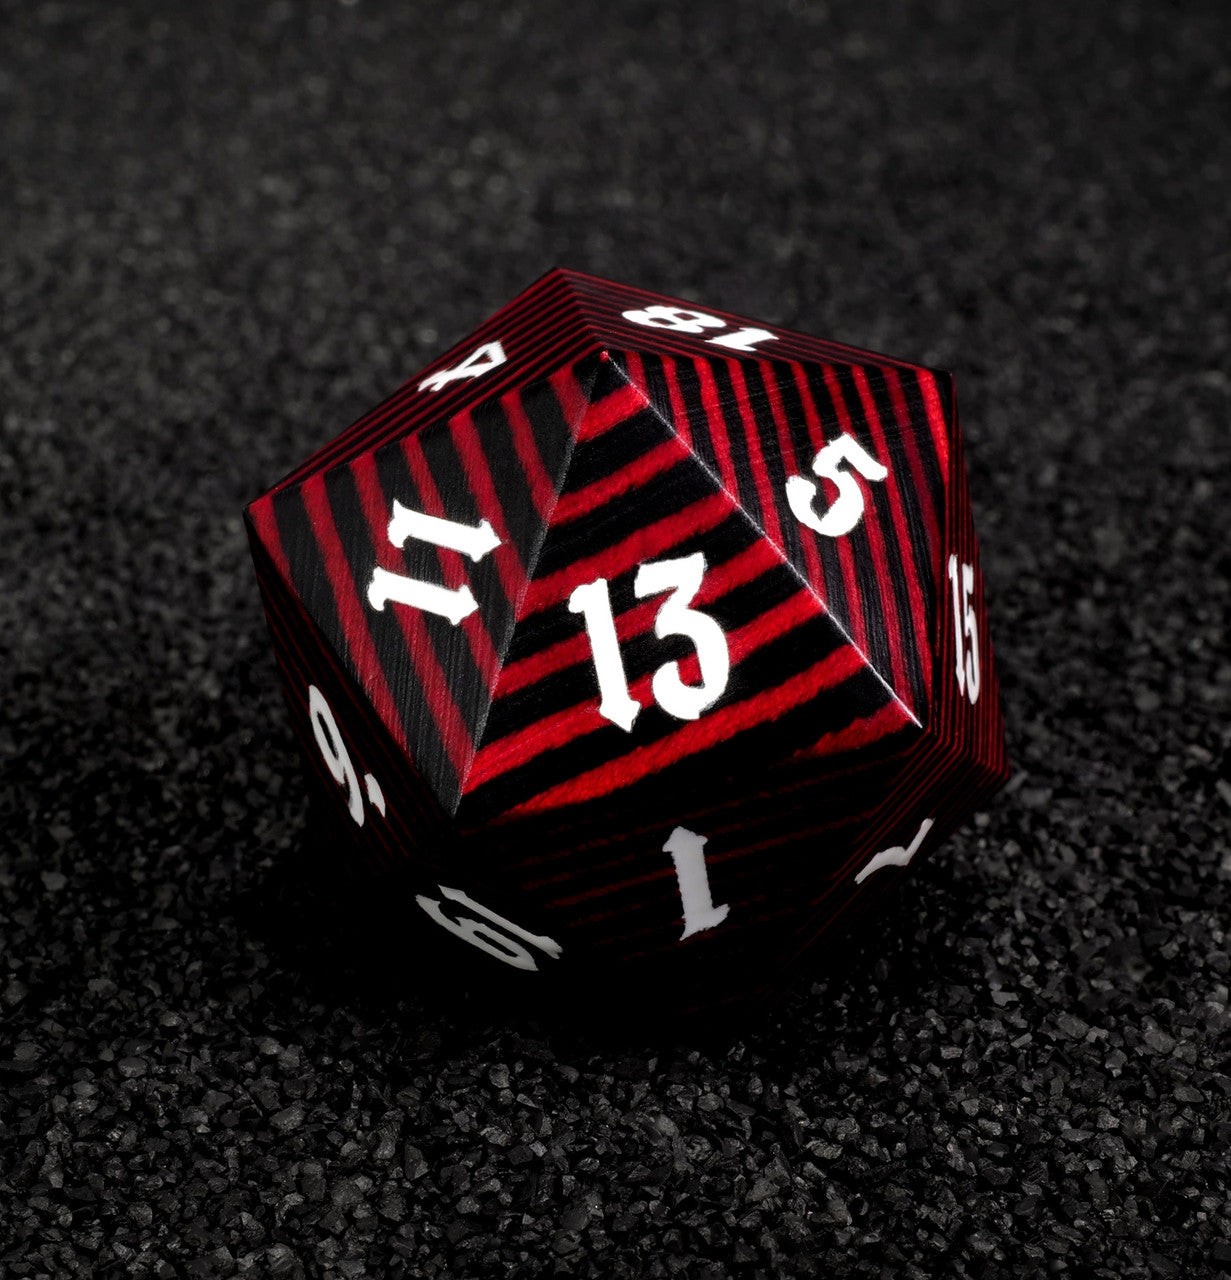 Black and Red 30mm Wooden D20